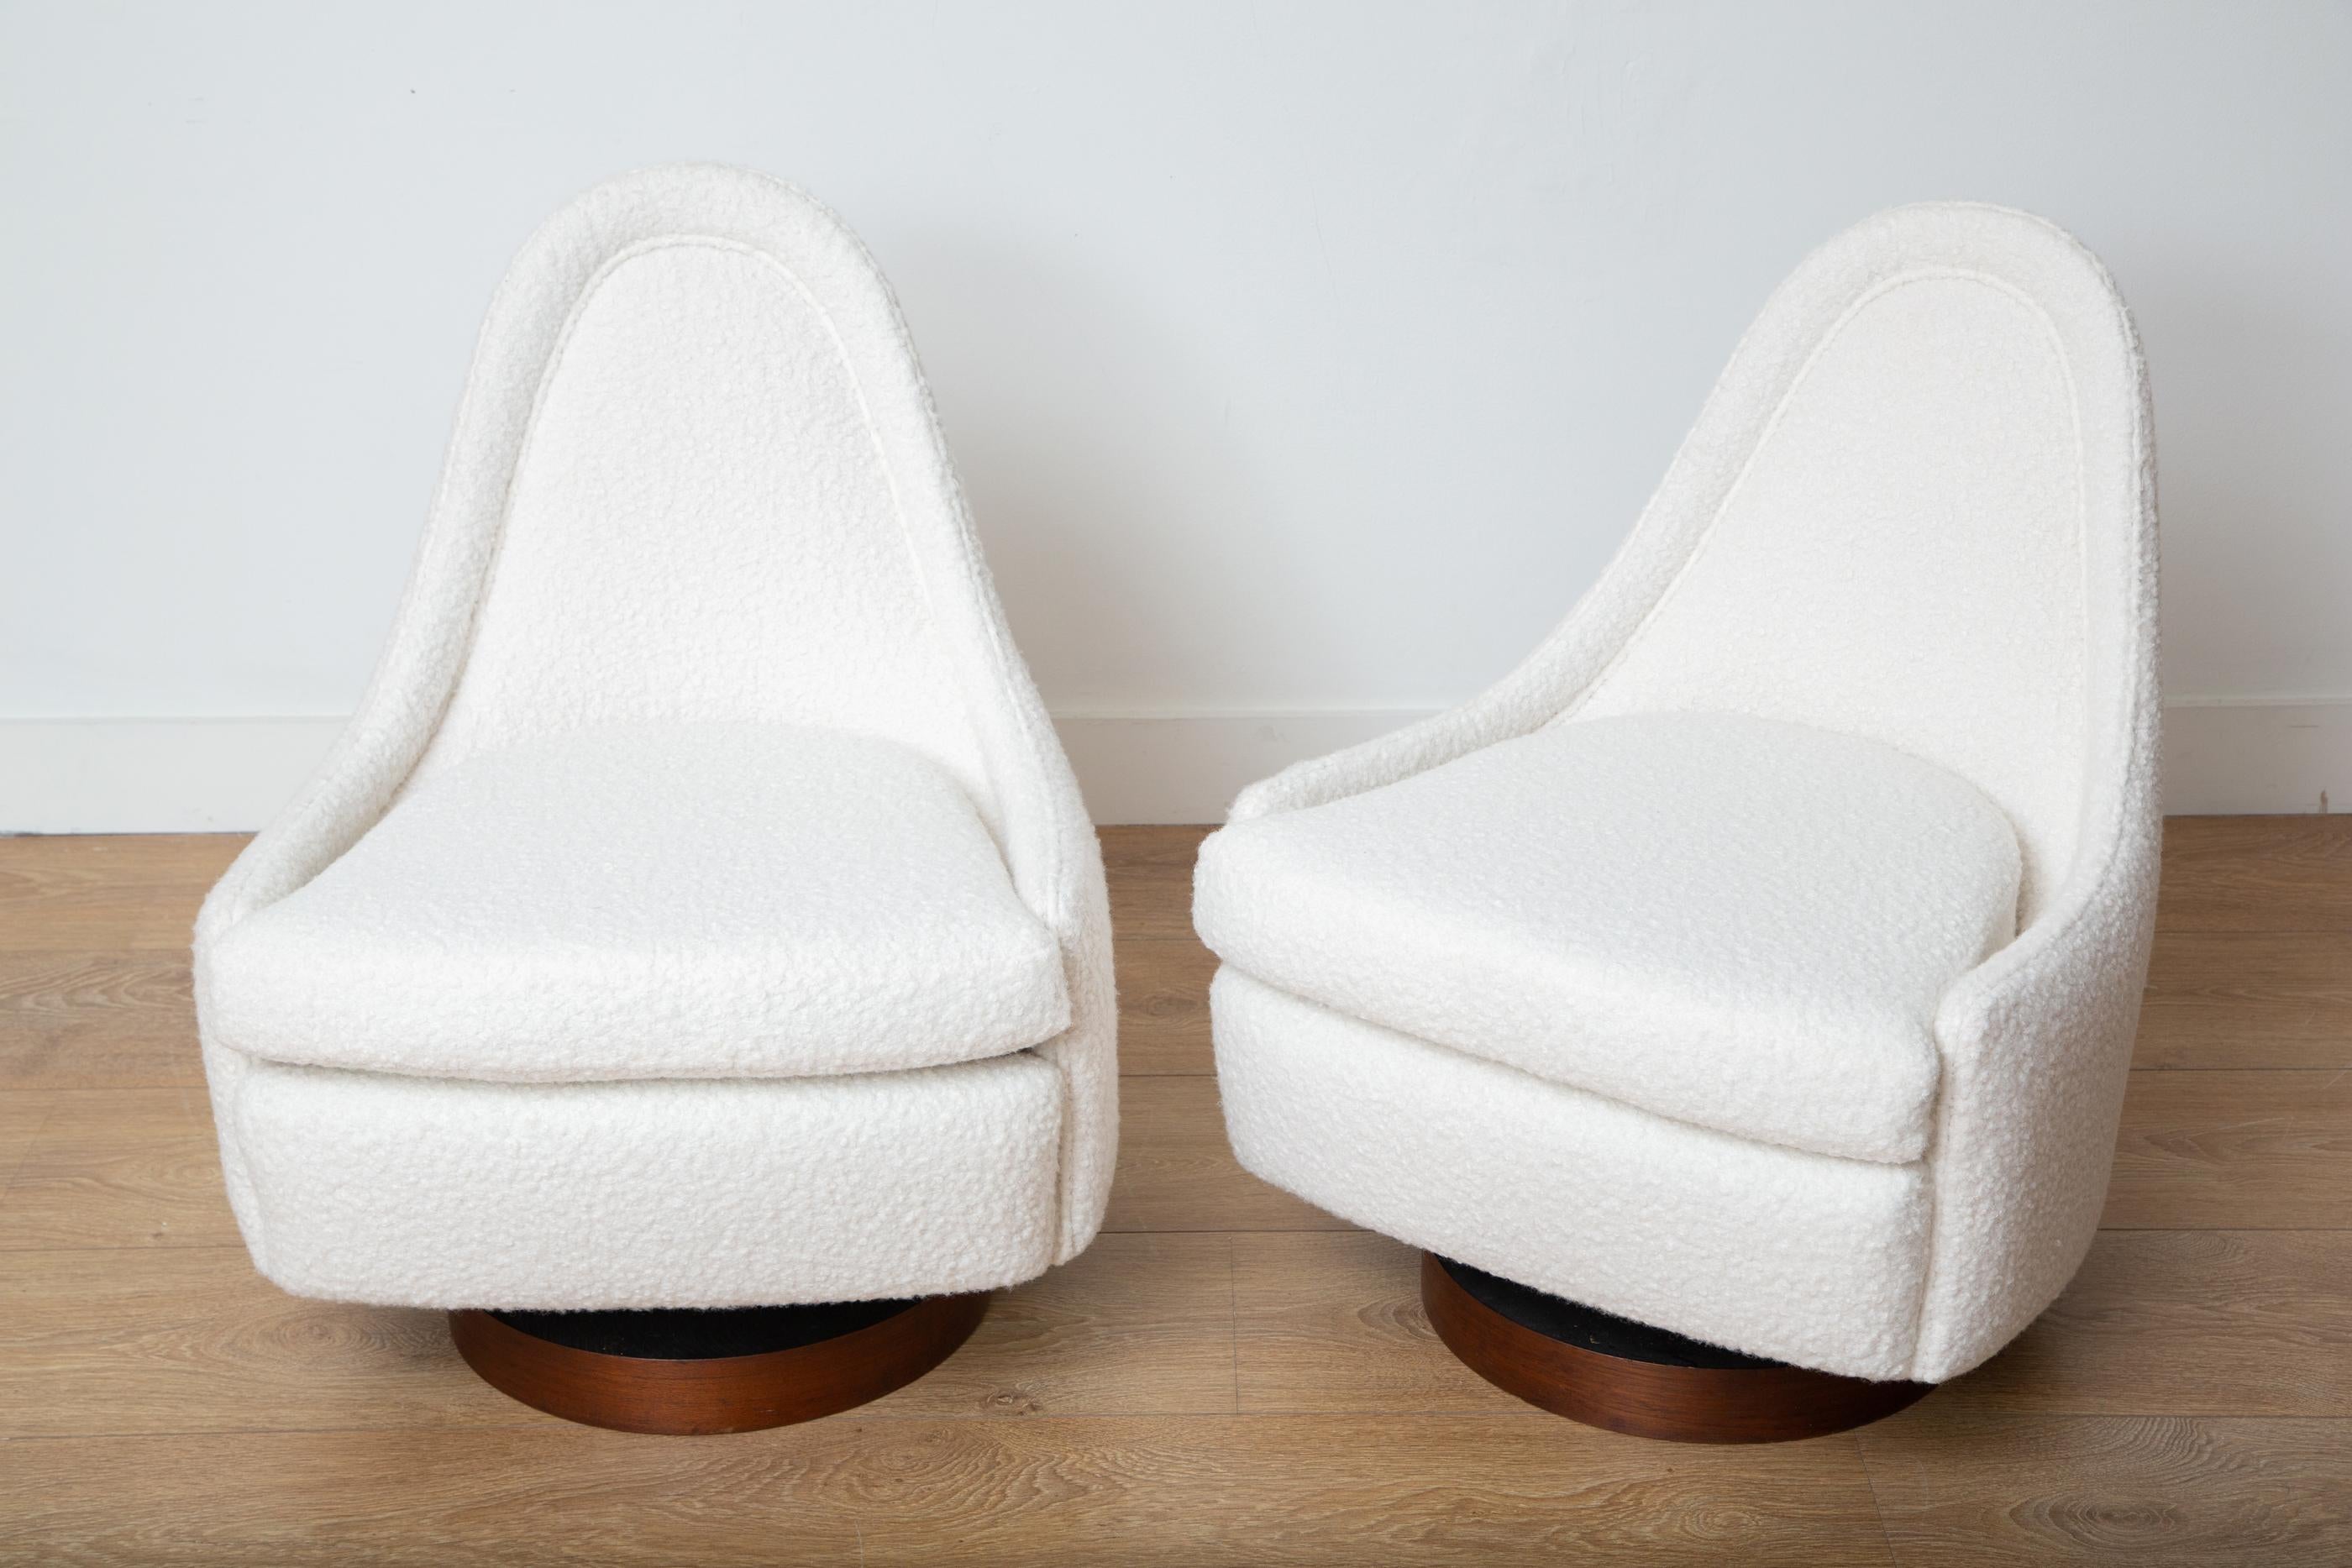 Pair of Mid-Century Modern petite tilt and swivel lounge chairs 
by Milo Baughman for Thayer Coggin
Sculptural teardrop back on a walnut base
Newly upholstered with a cream boucle
4 available, priced per pair
Available to view in-situ in our